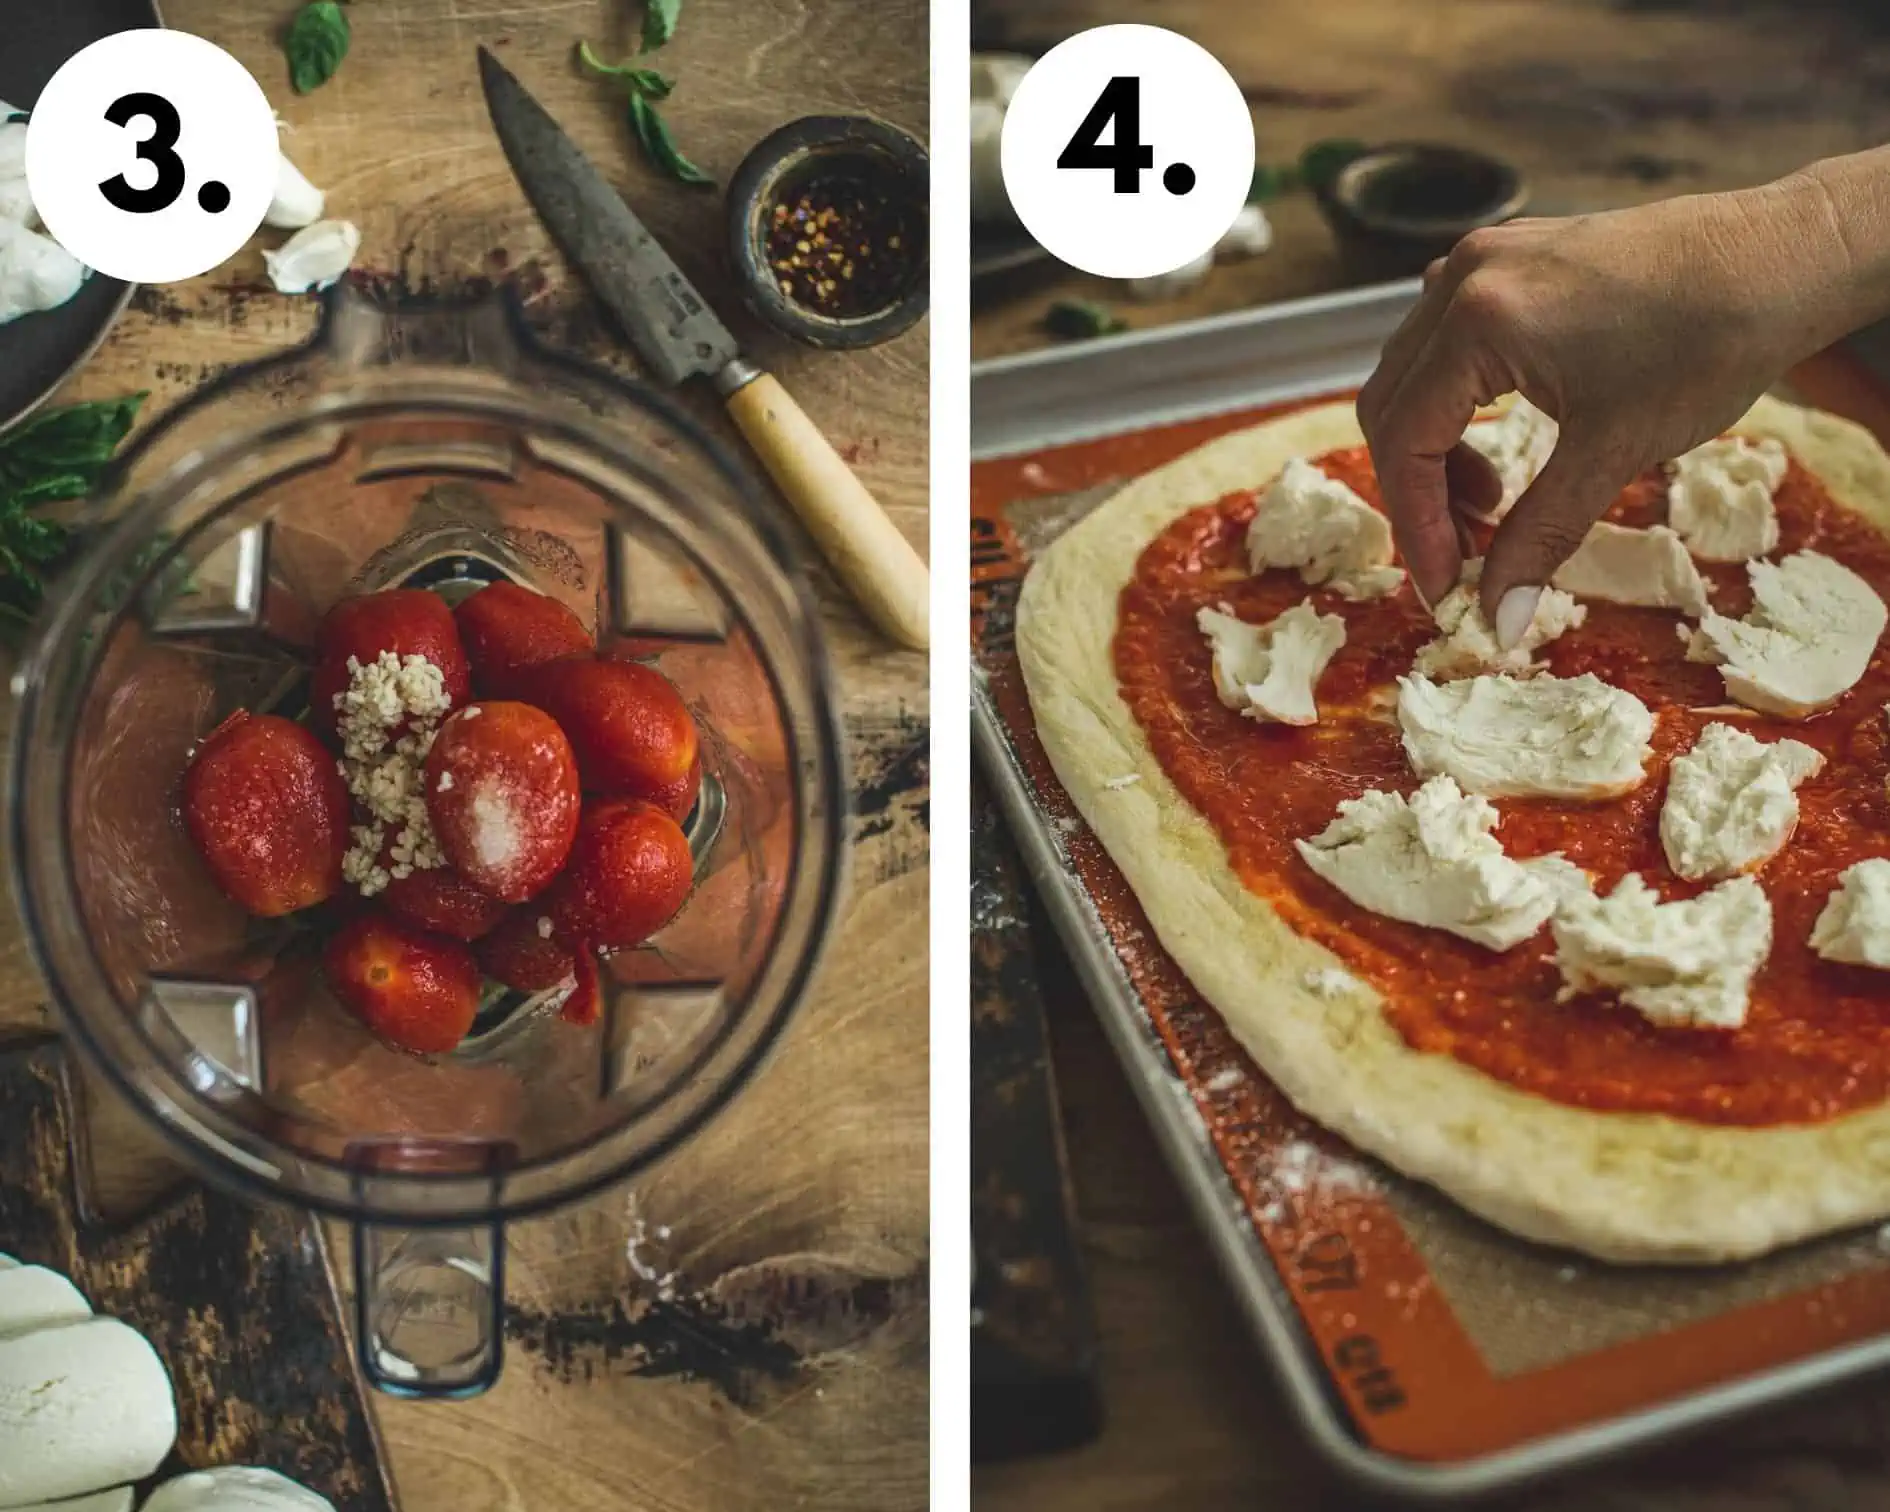 Homemade Margherita pizza steps 3 and 4.